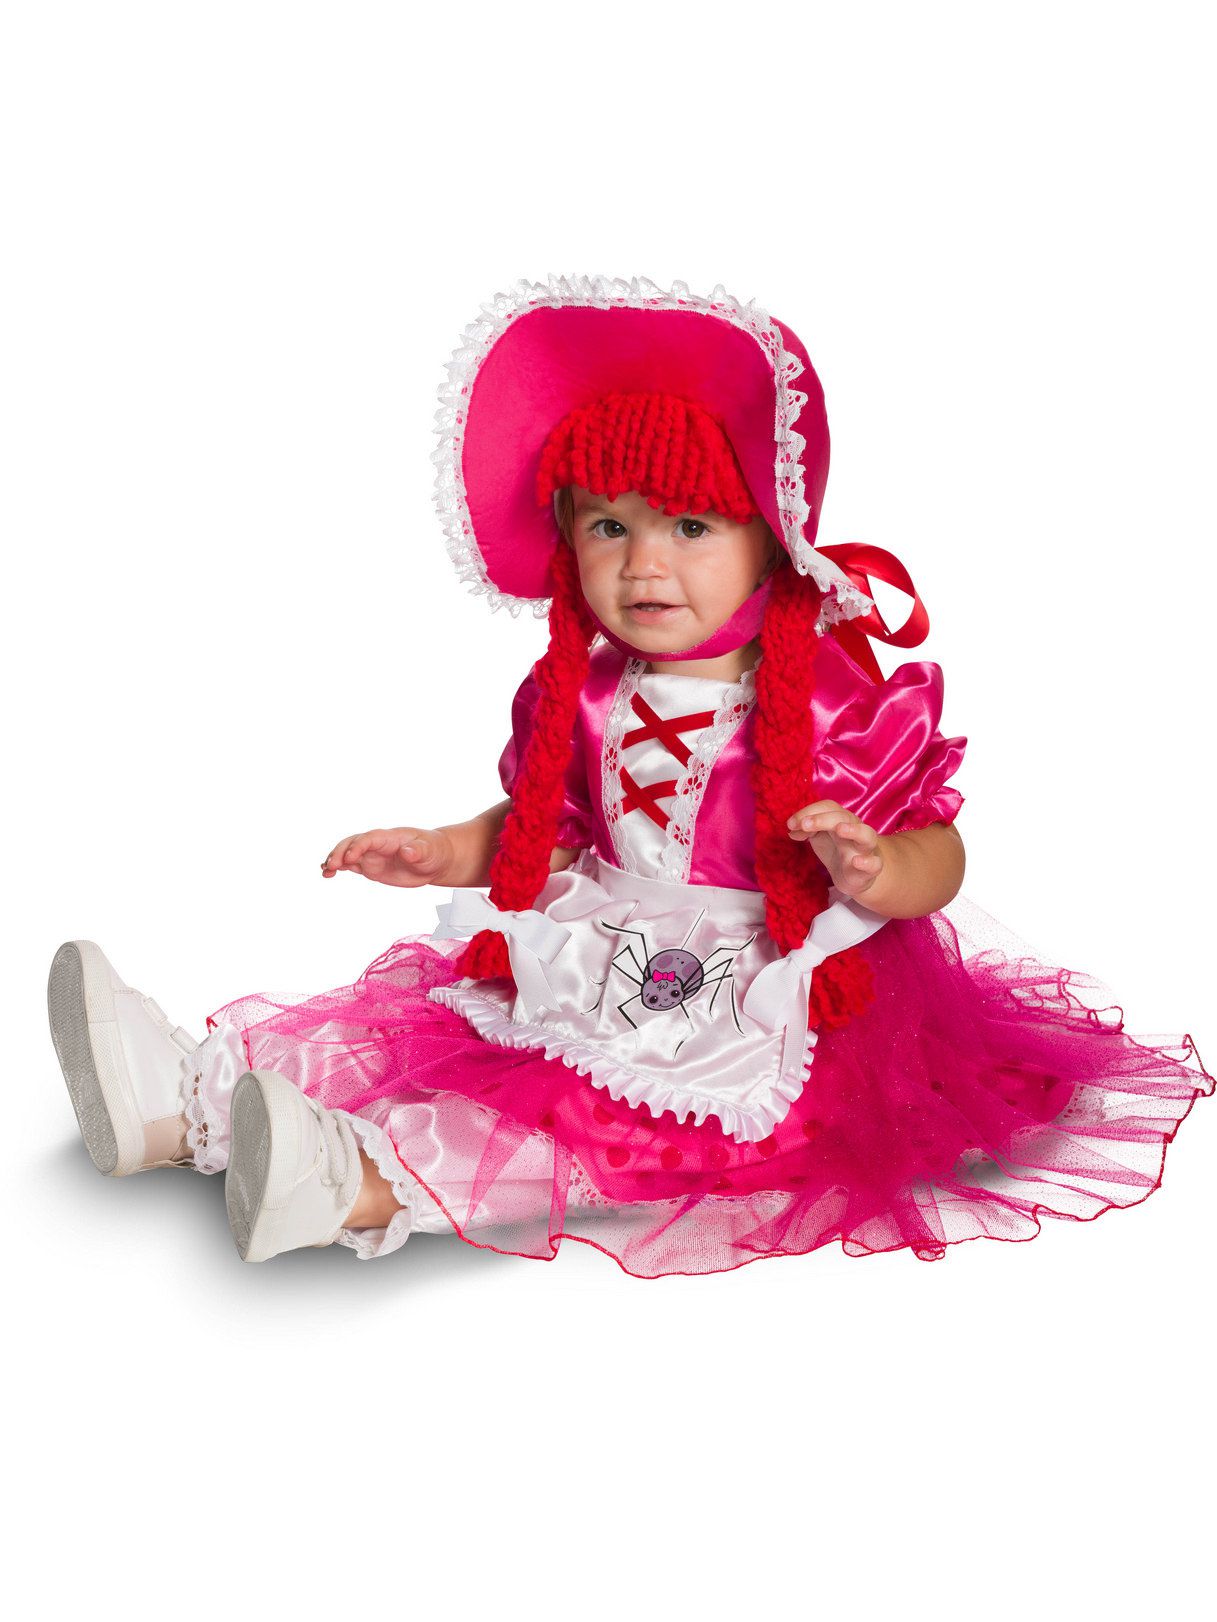 Baby Little Miss Muffet Costume - image 1 of 2